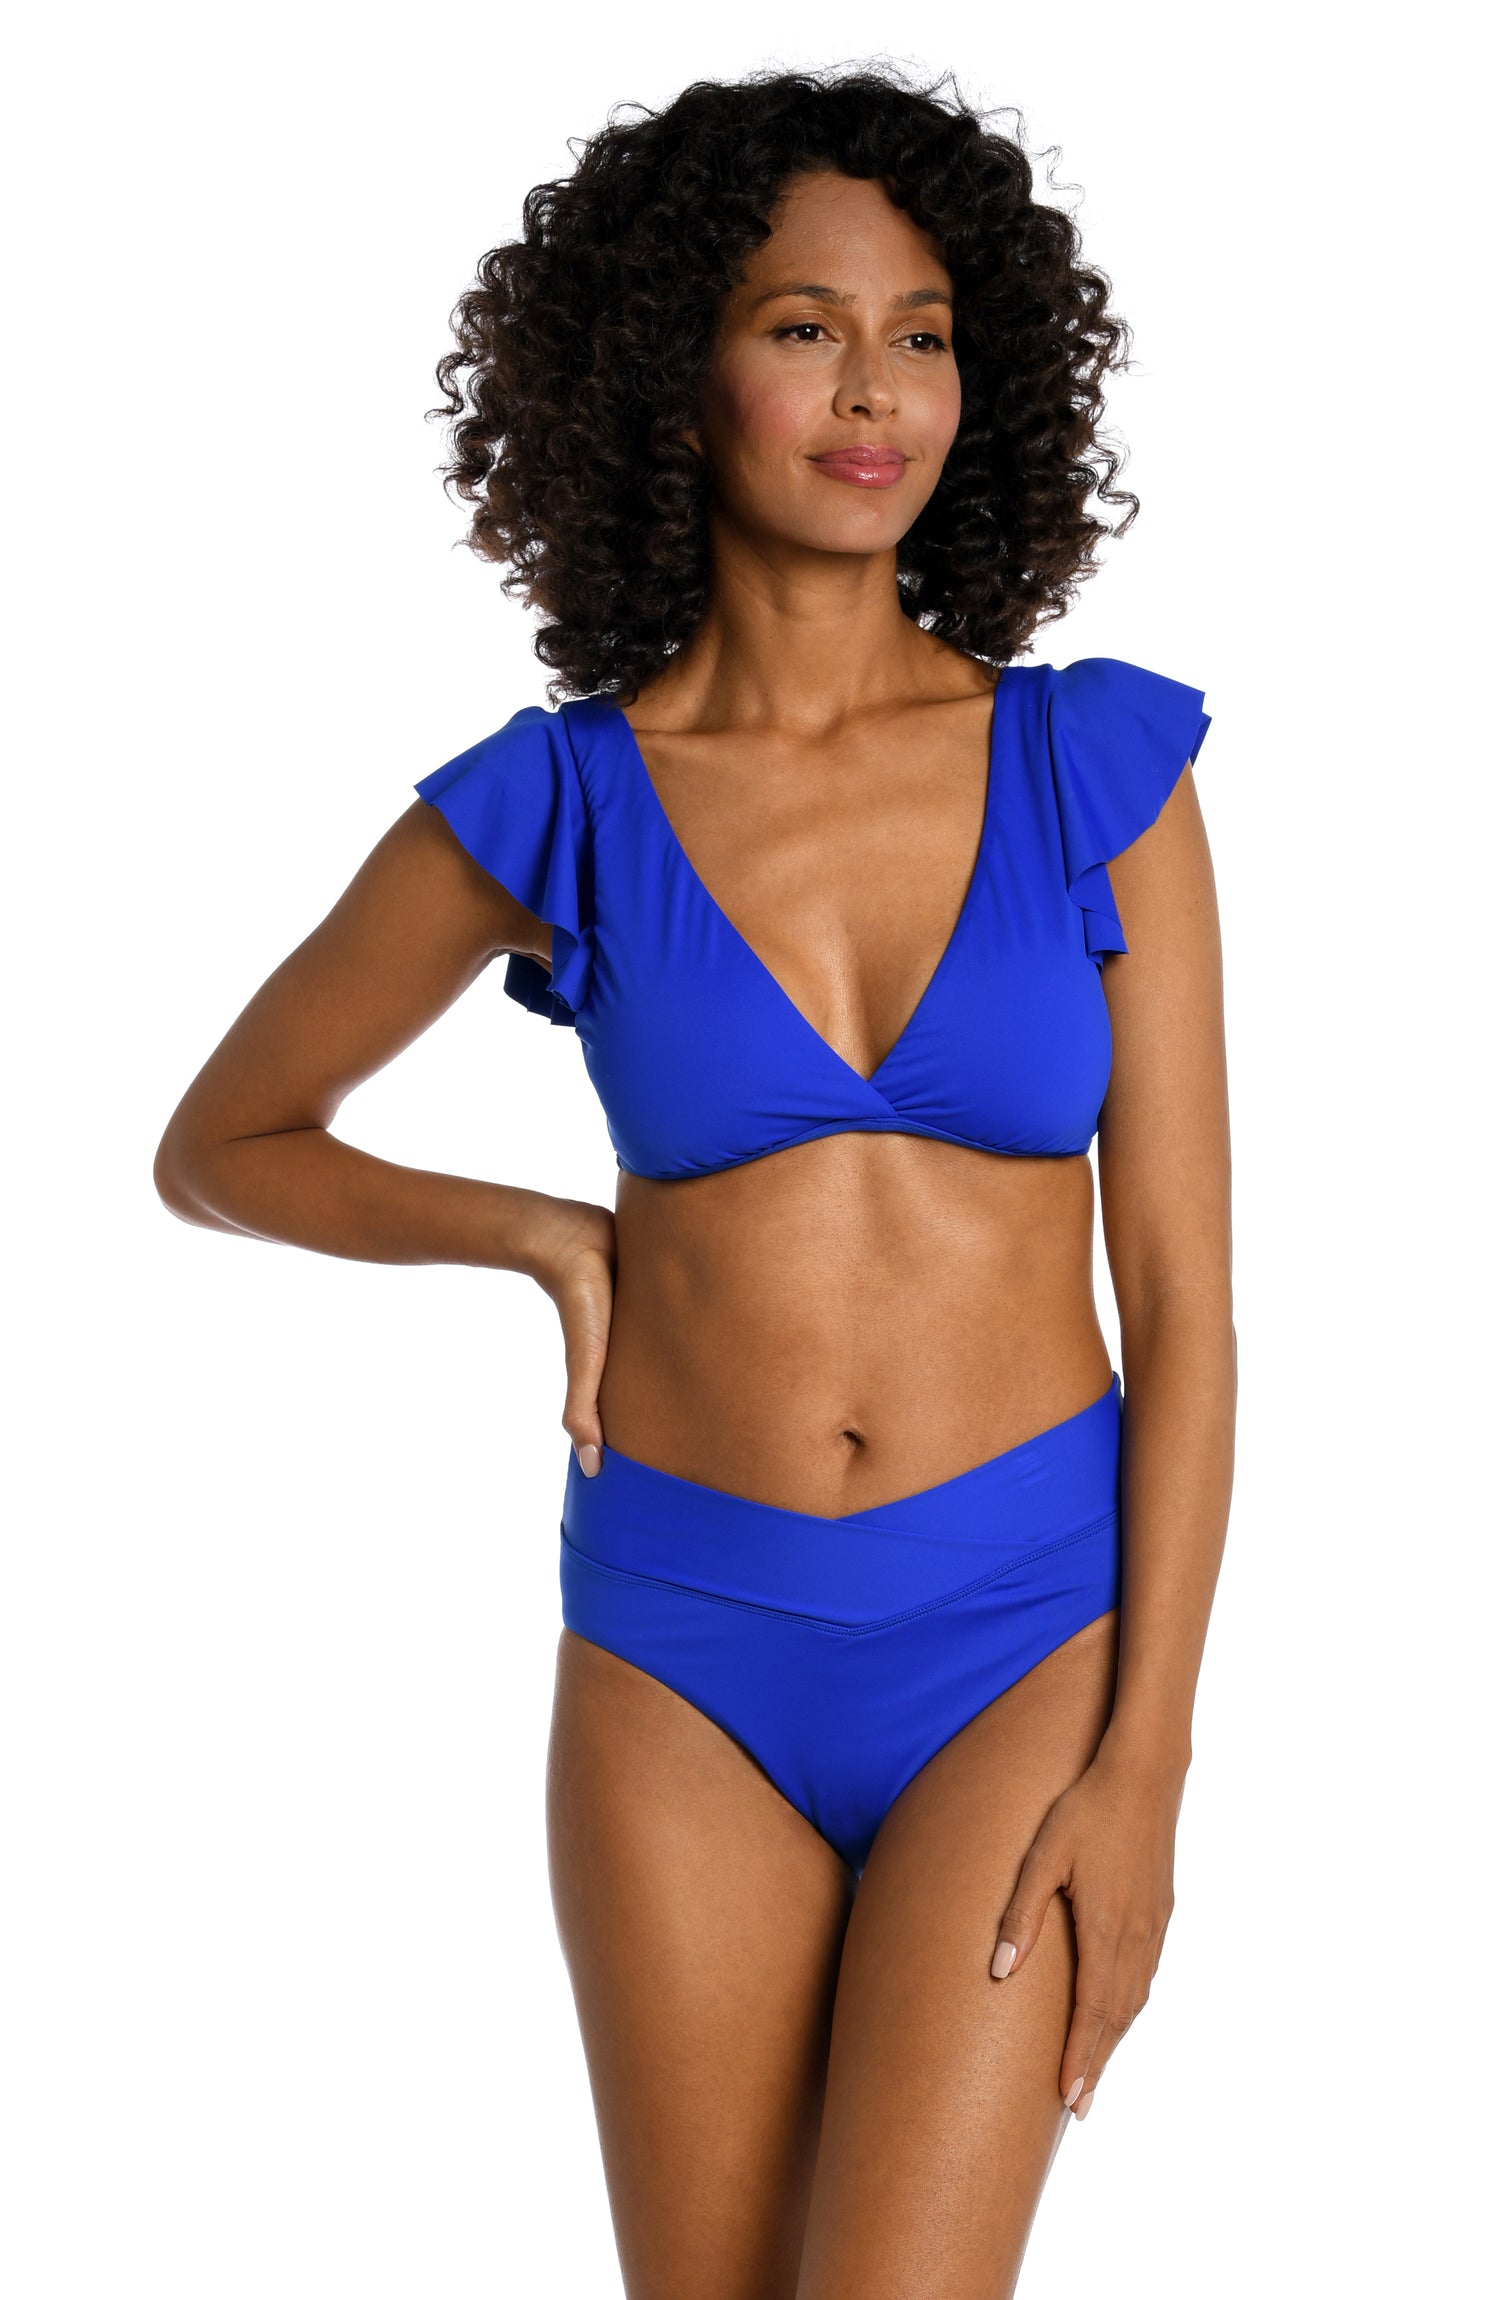 Model is wearing a sapphire colored ruffle sleeve swimsuit top from our Best-Selling Island Goddess collection.